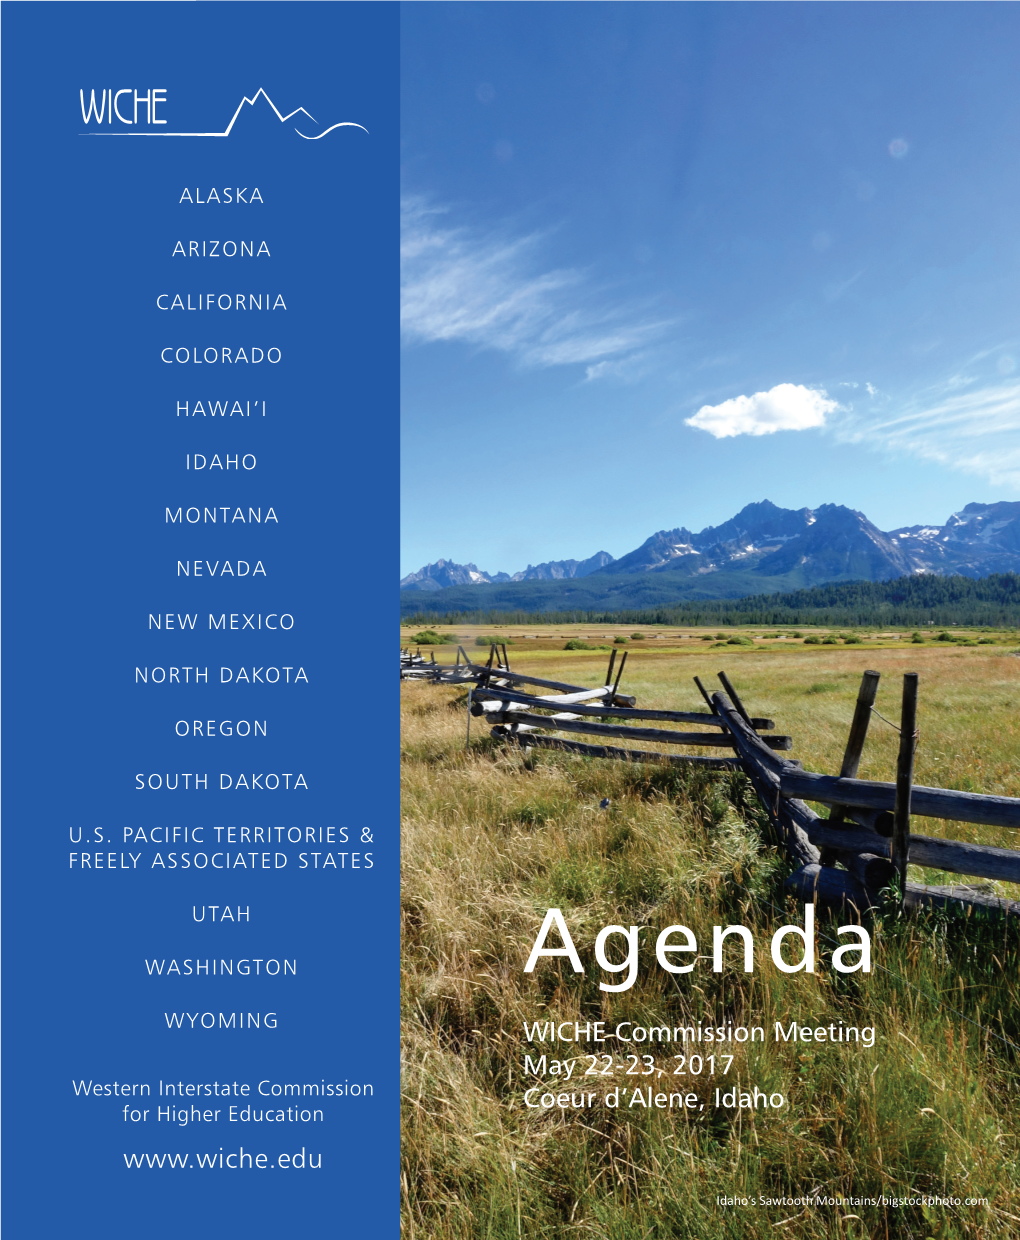 Agenda WYOMING WICHE Commission Meeting May 22-23, 2017 Western Interstate Commission Coeur D’Alene, Idaho for Higher Education